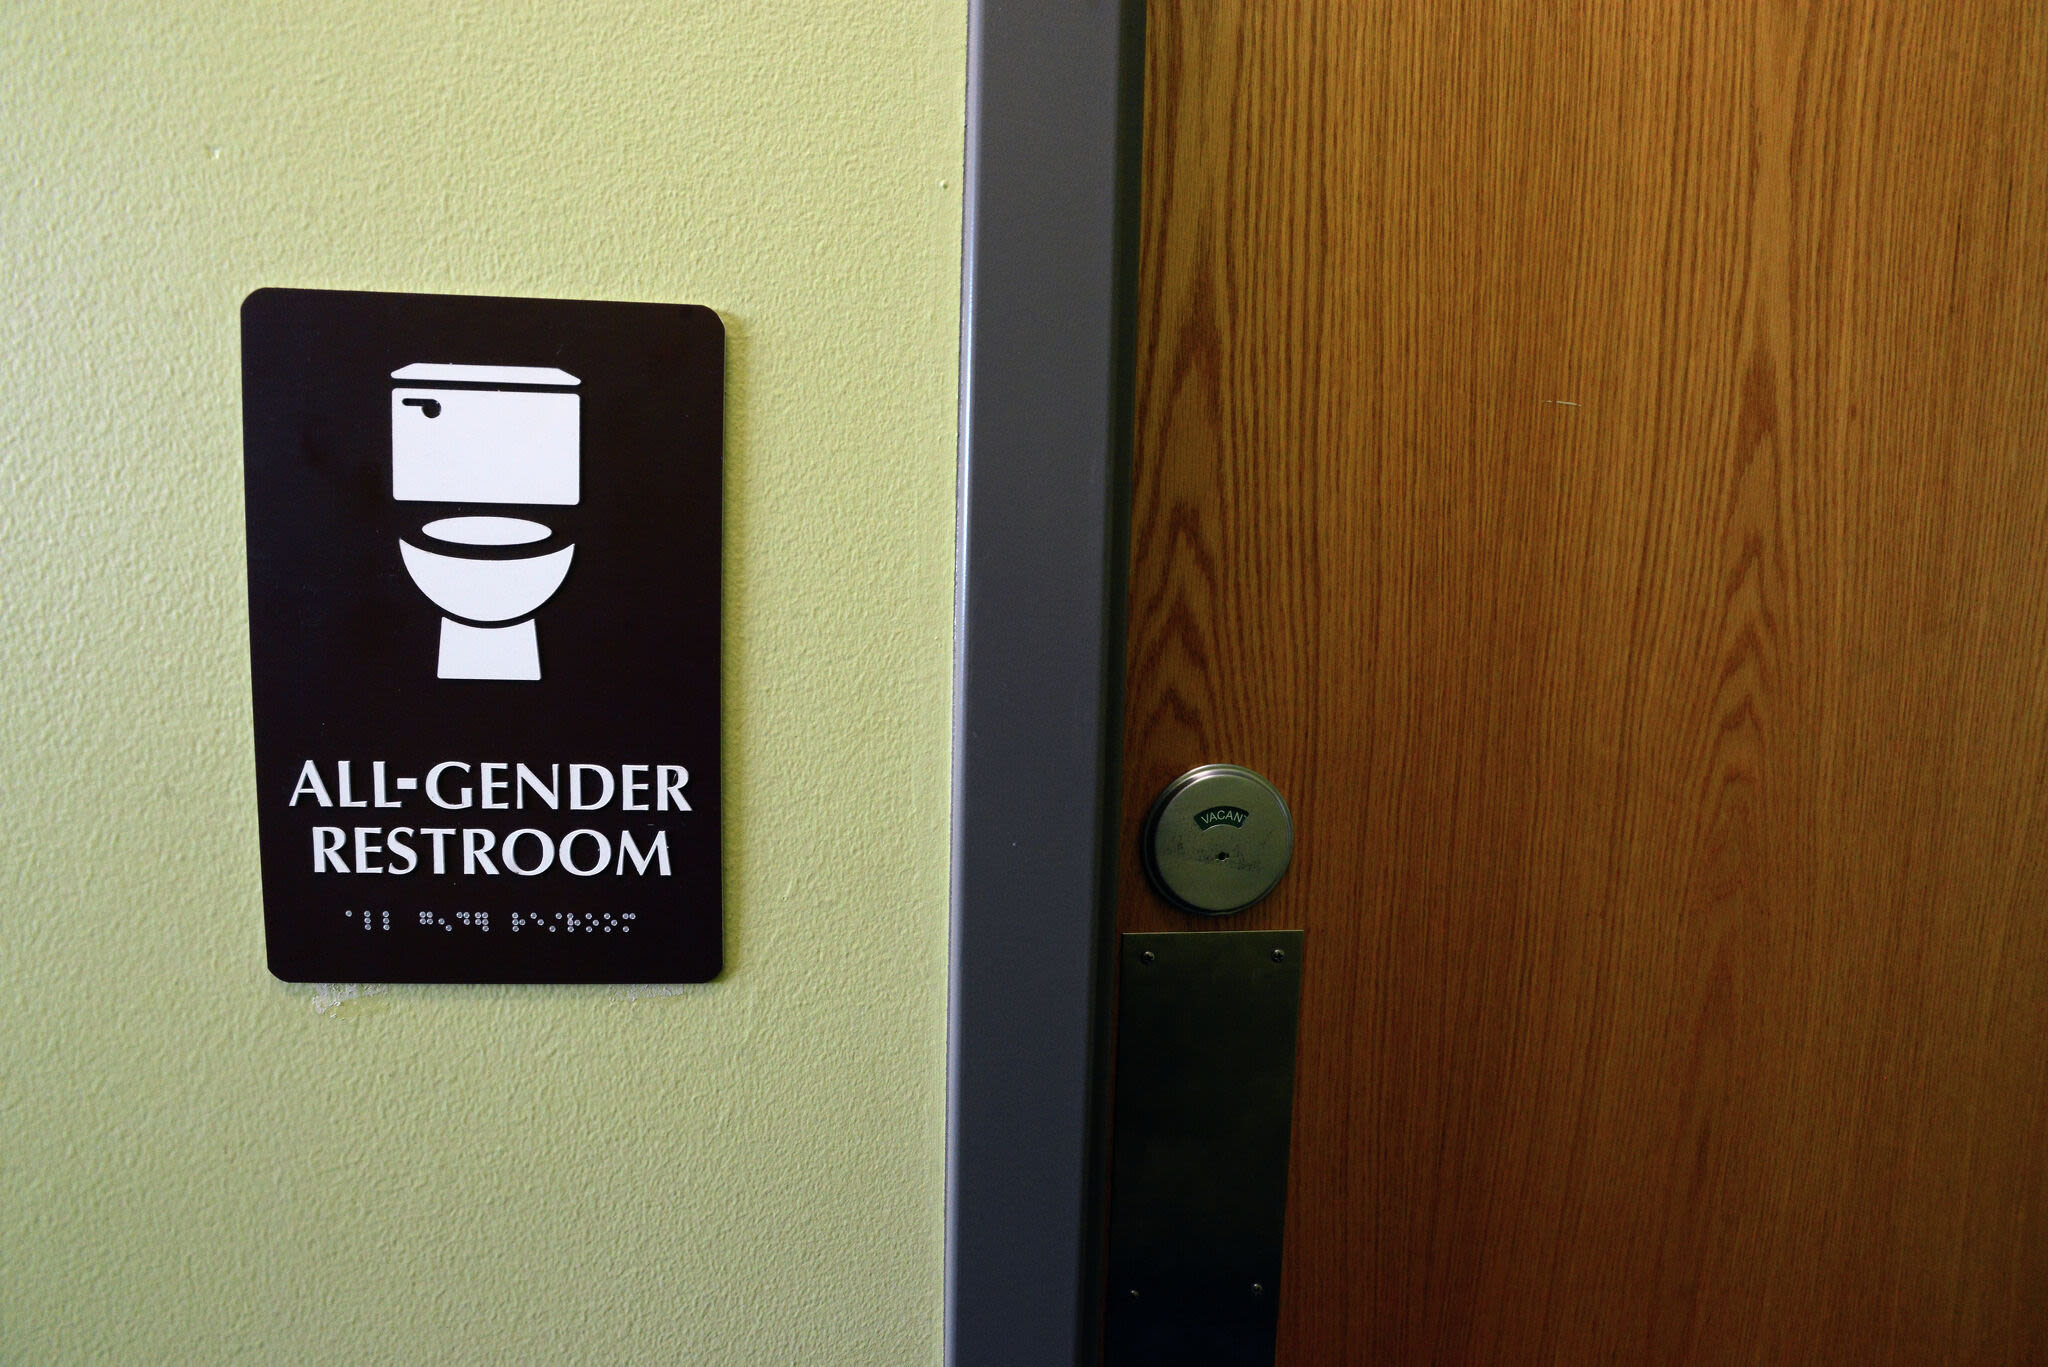 Why Connecticut schools could soon have more all-gender bathrooms